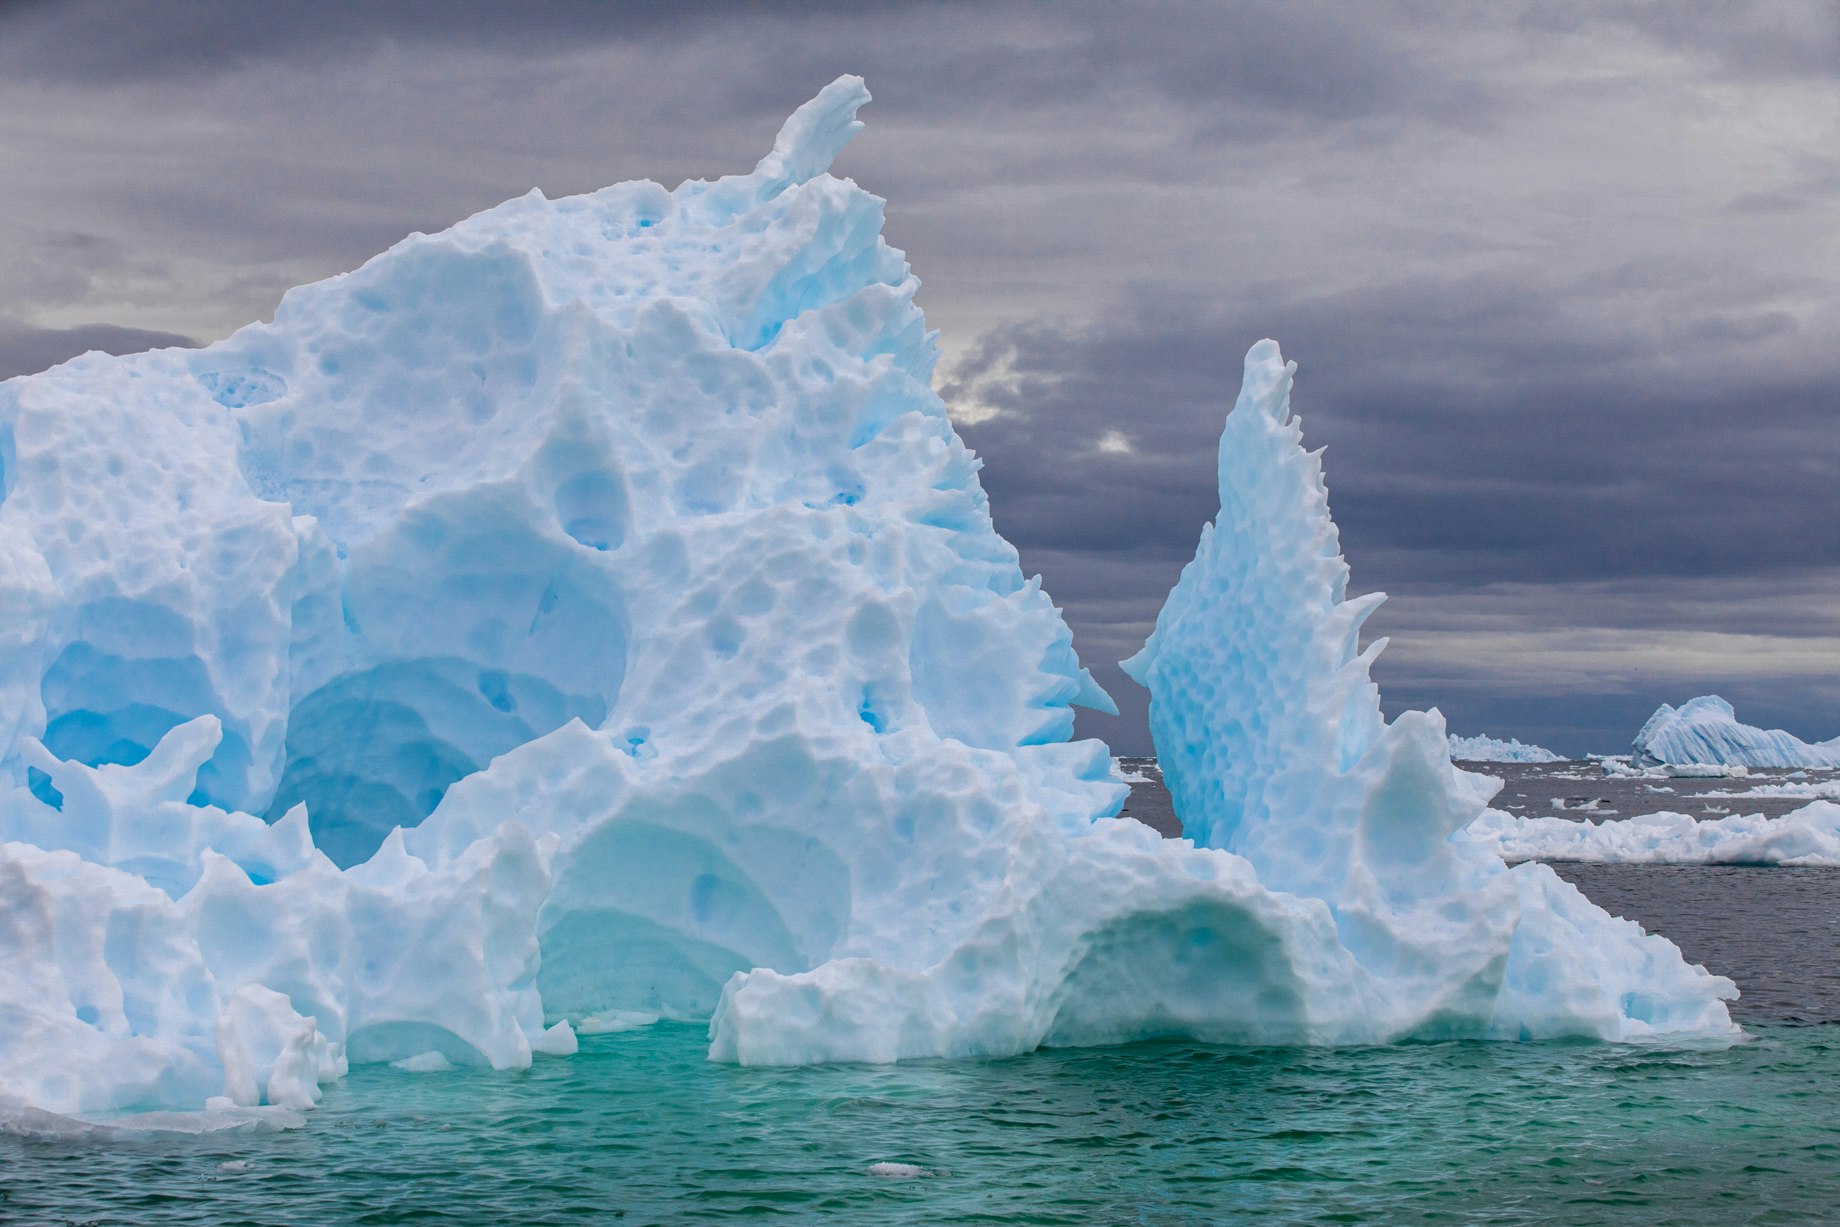 An iceberg of blue and white rises from the ocean.